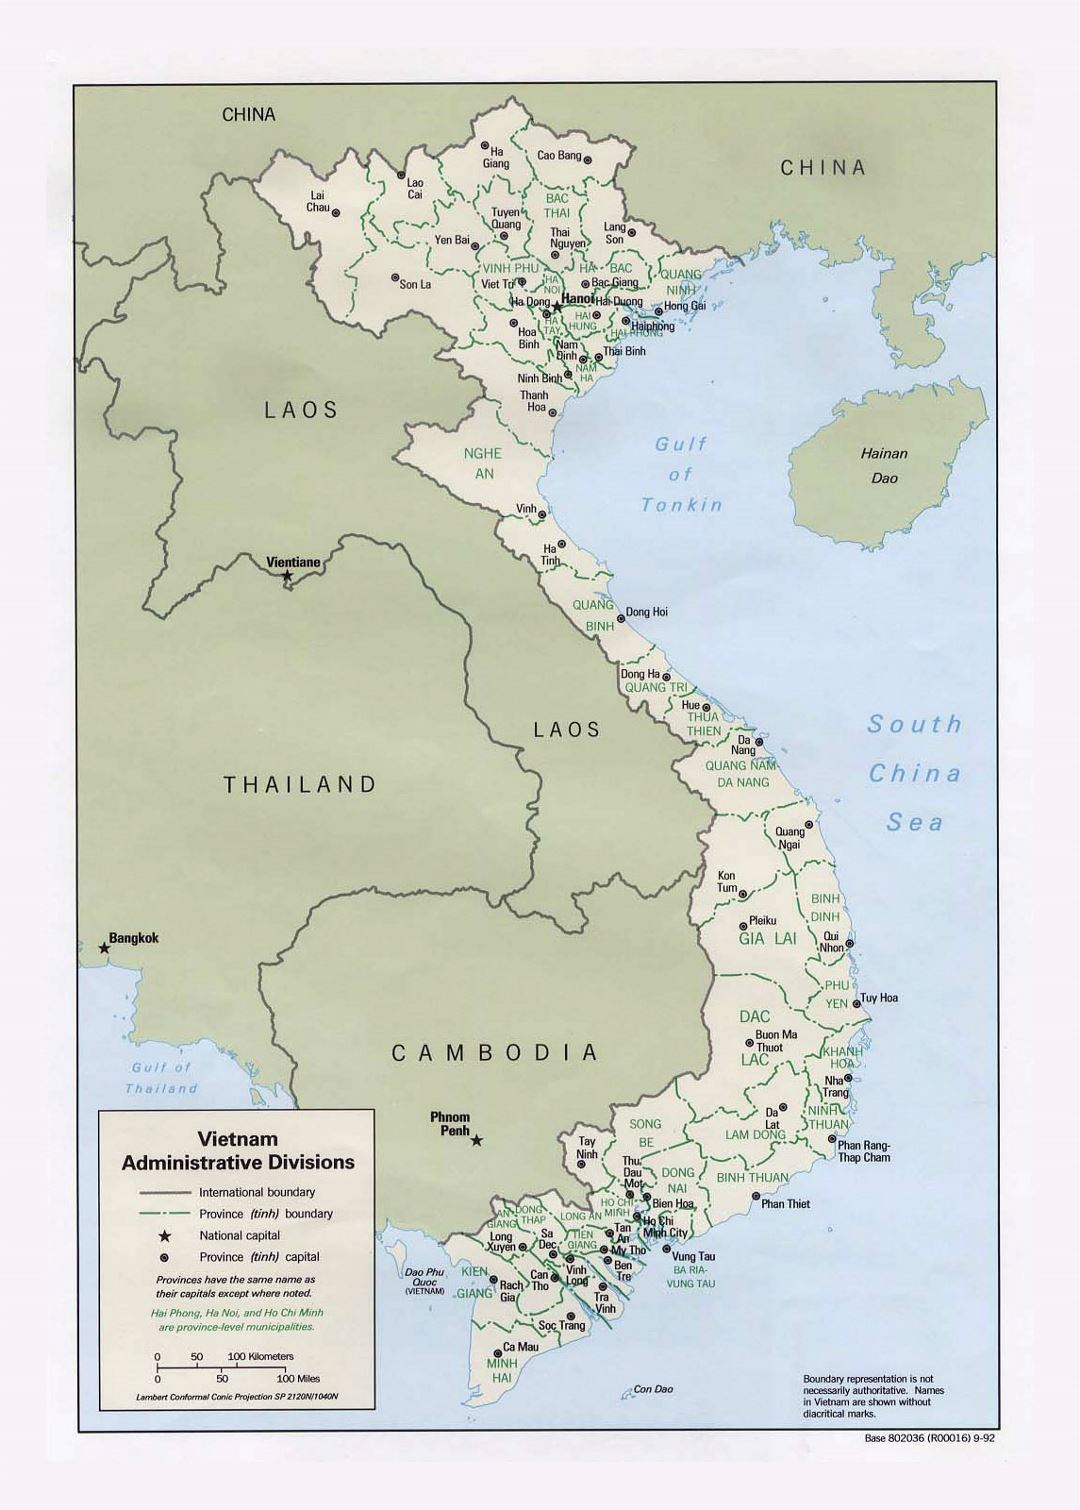 Detailed administrative divisions map of Vietnam - 1992